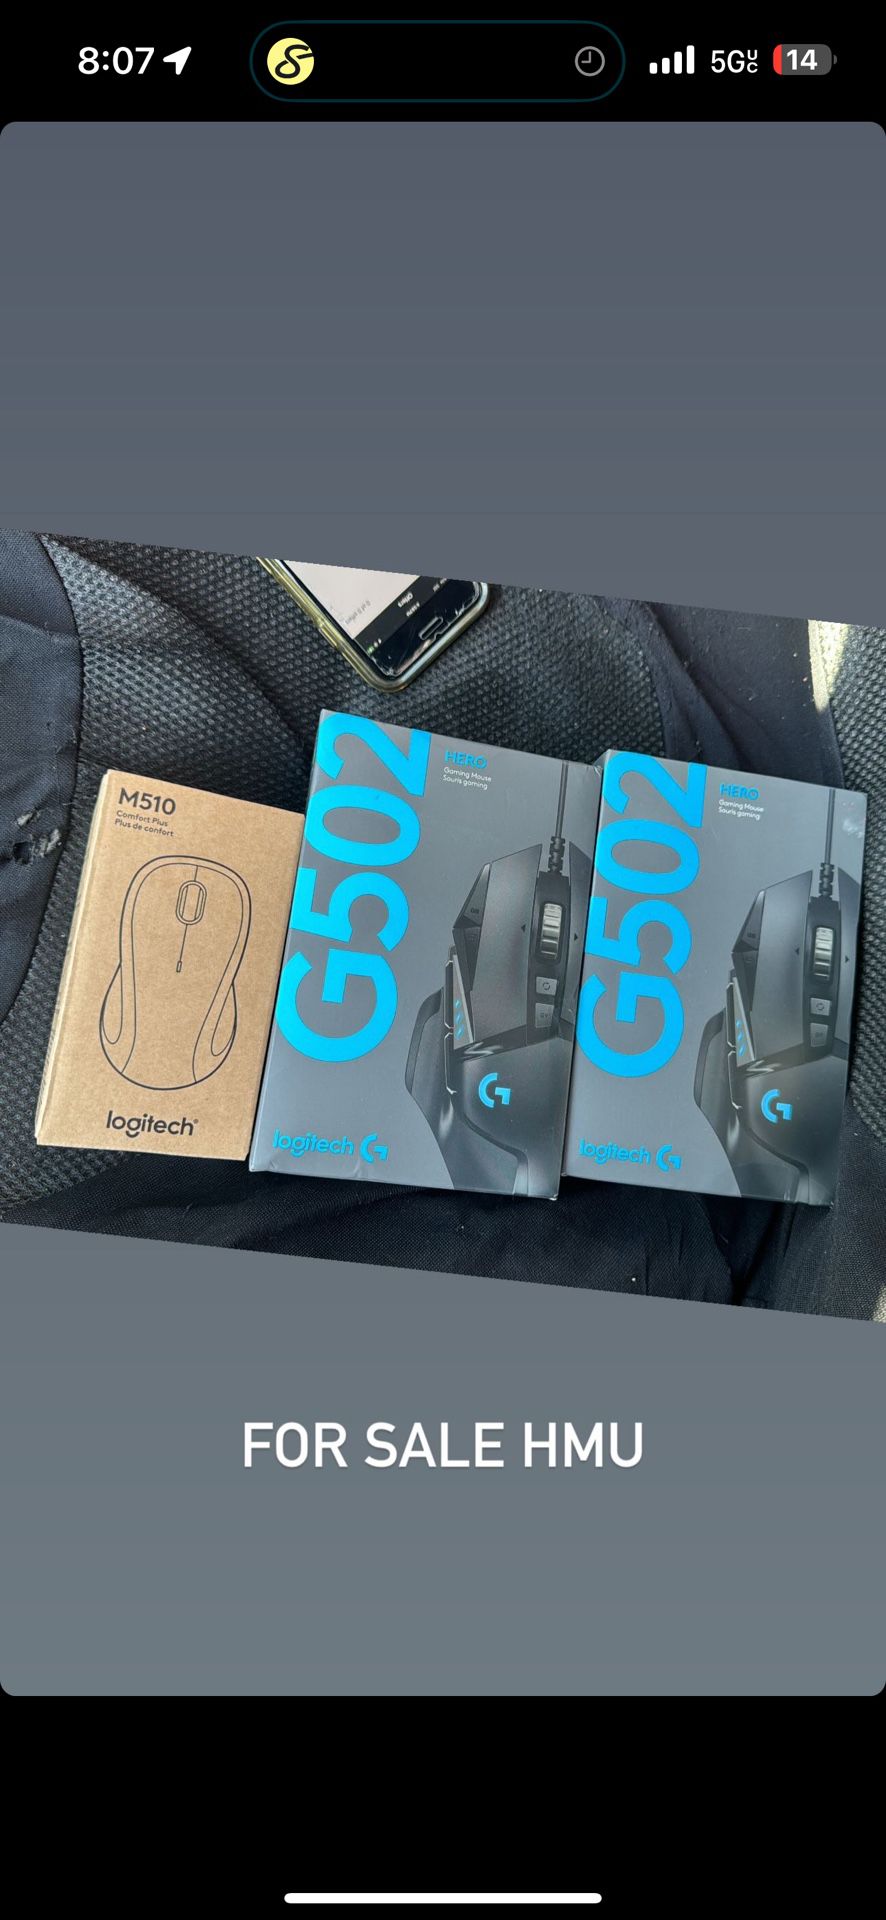 Logitech Gaming Mouses Plus A Regular One